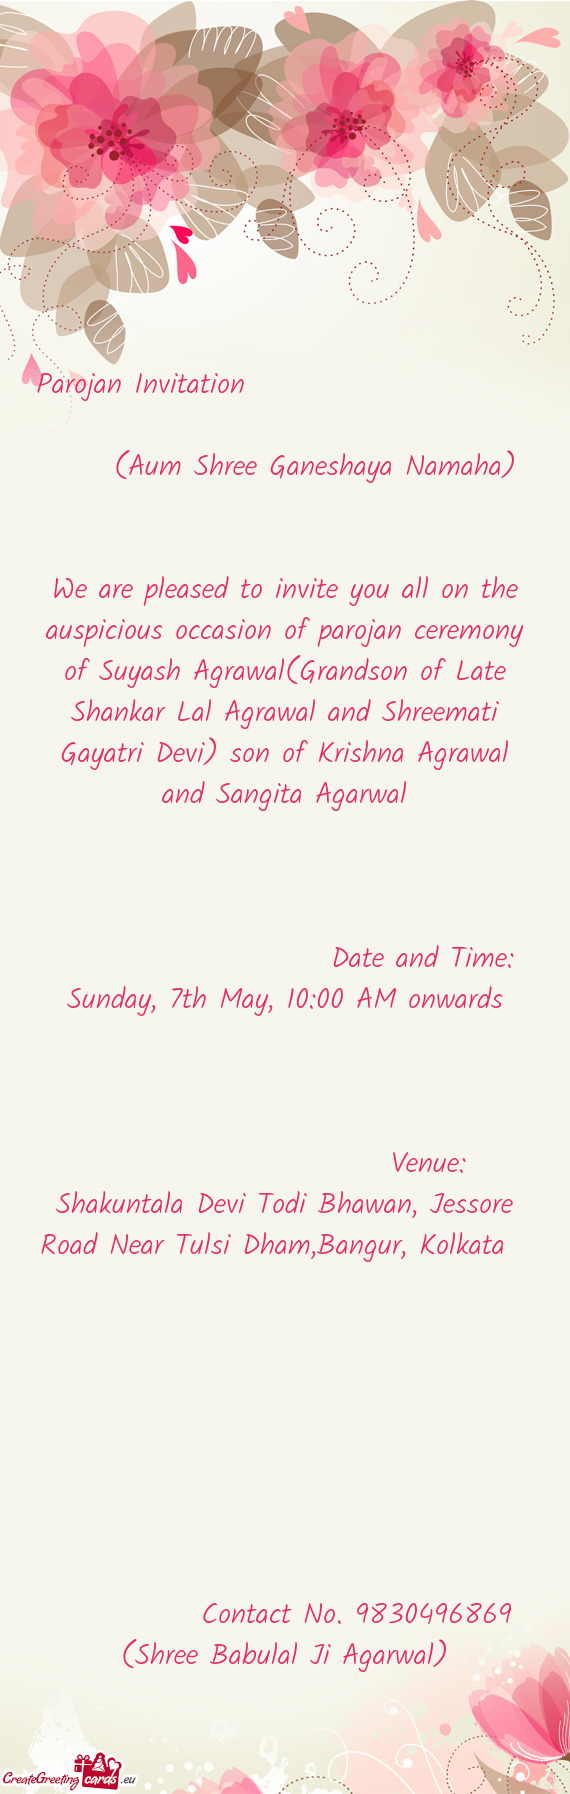 We are pleased to invite you all on the auspicious occasion o